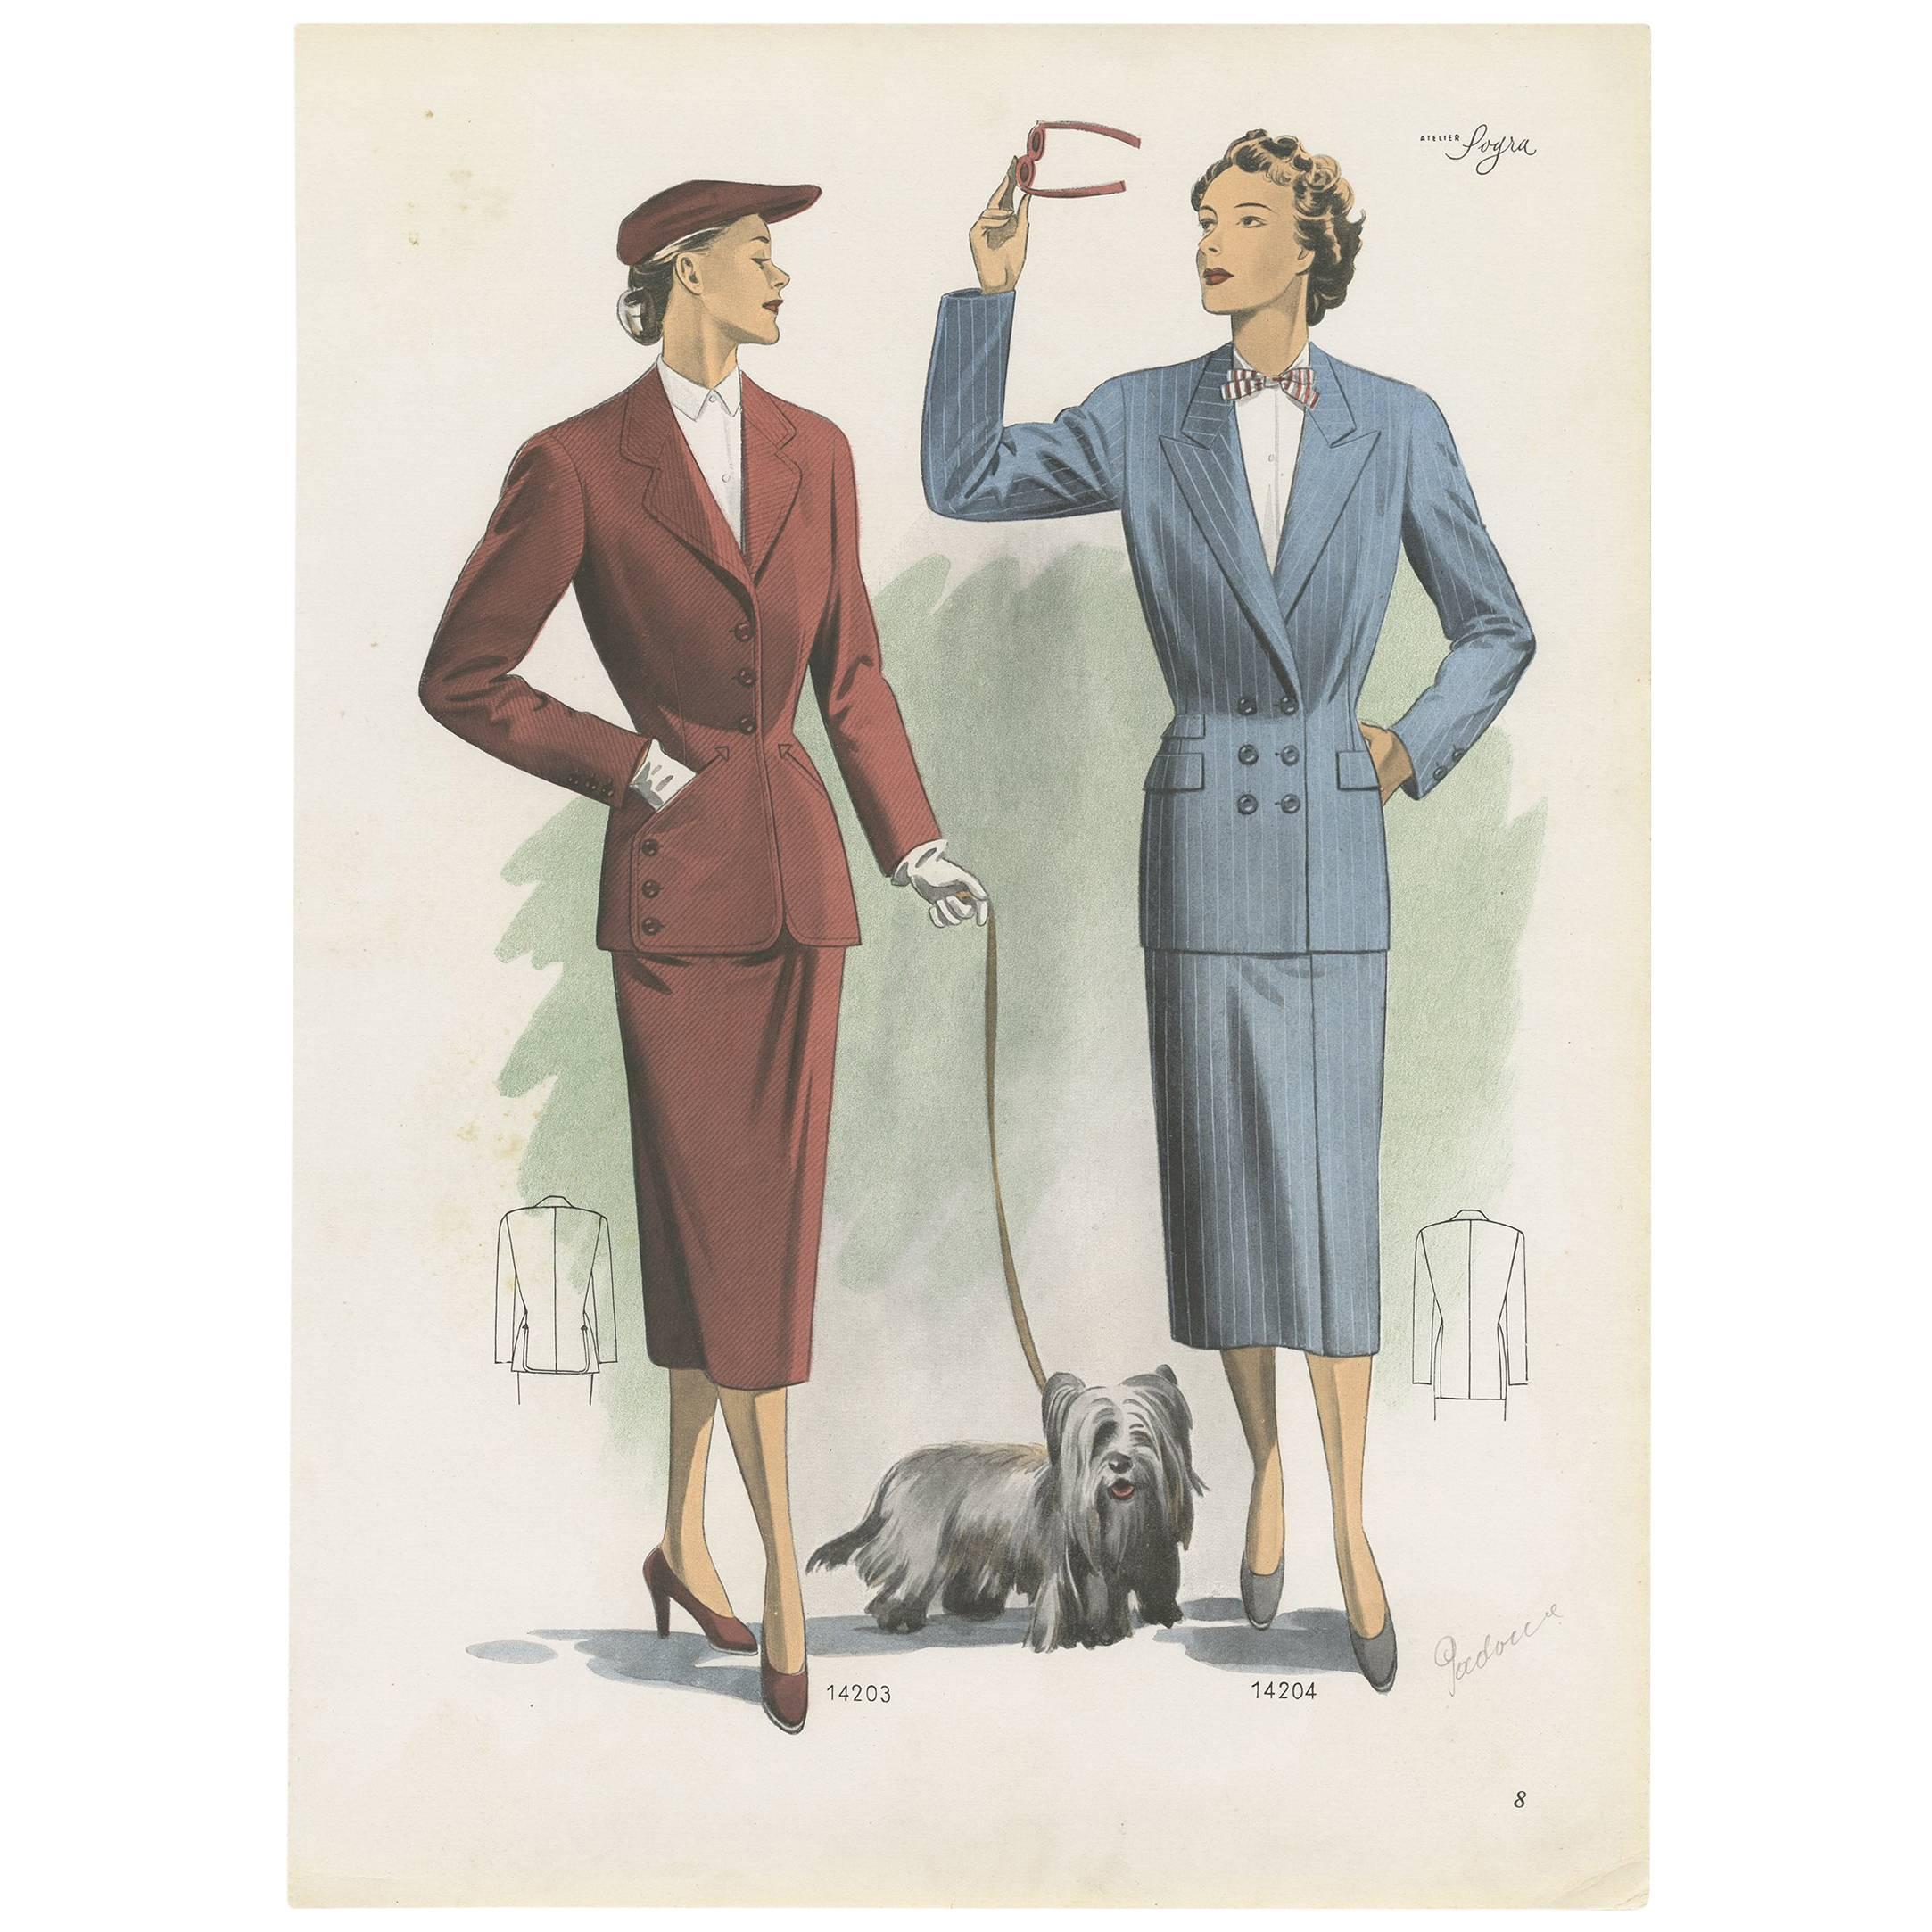 Vintage Fashion Print 'Pl. 14203' Published in Ladies Styles, 1951